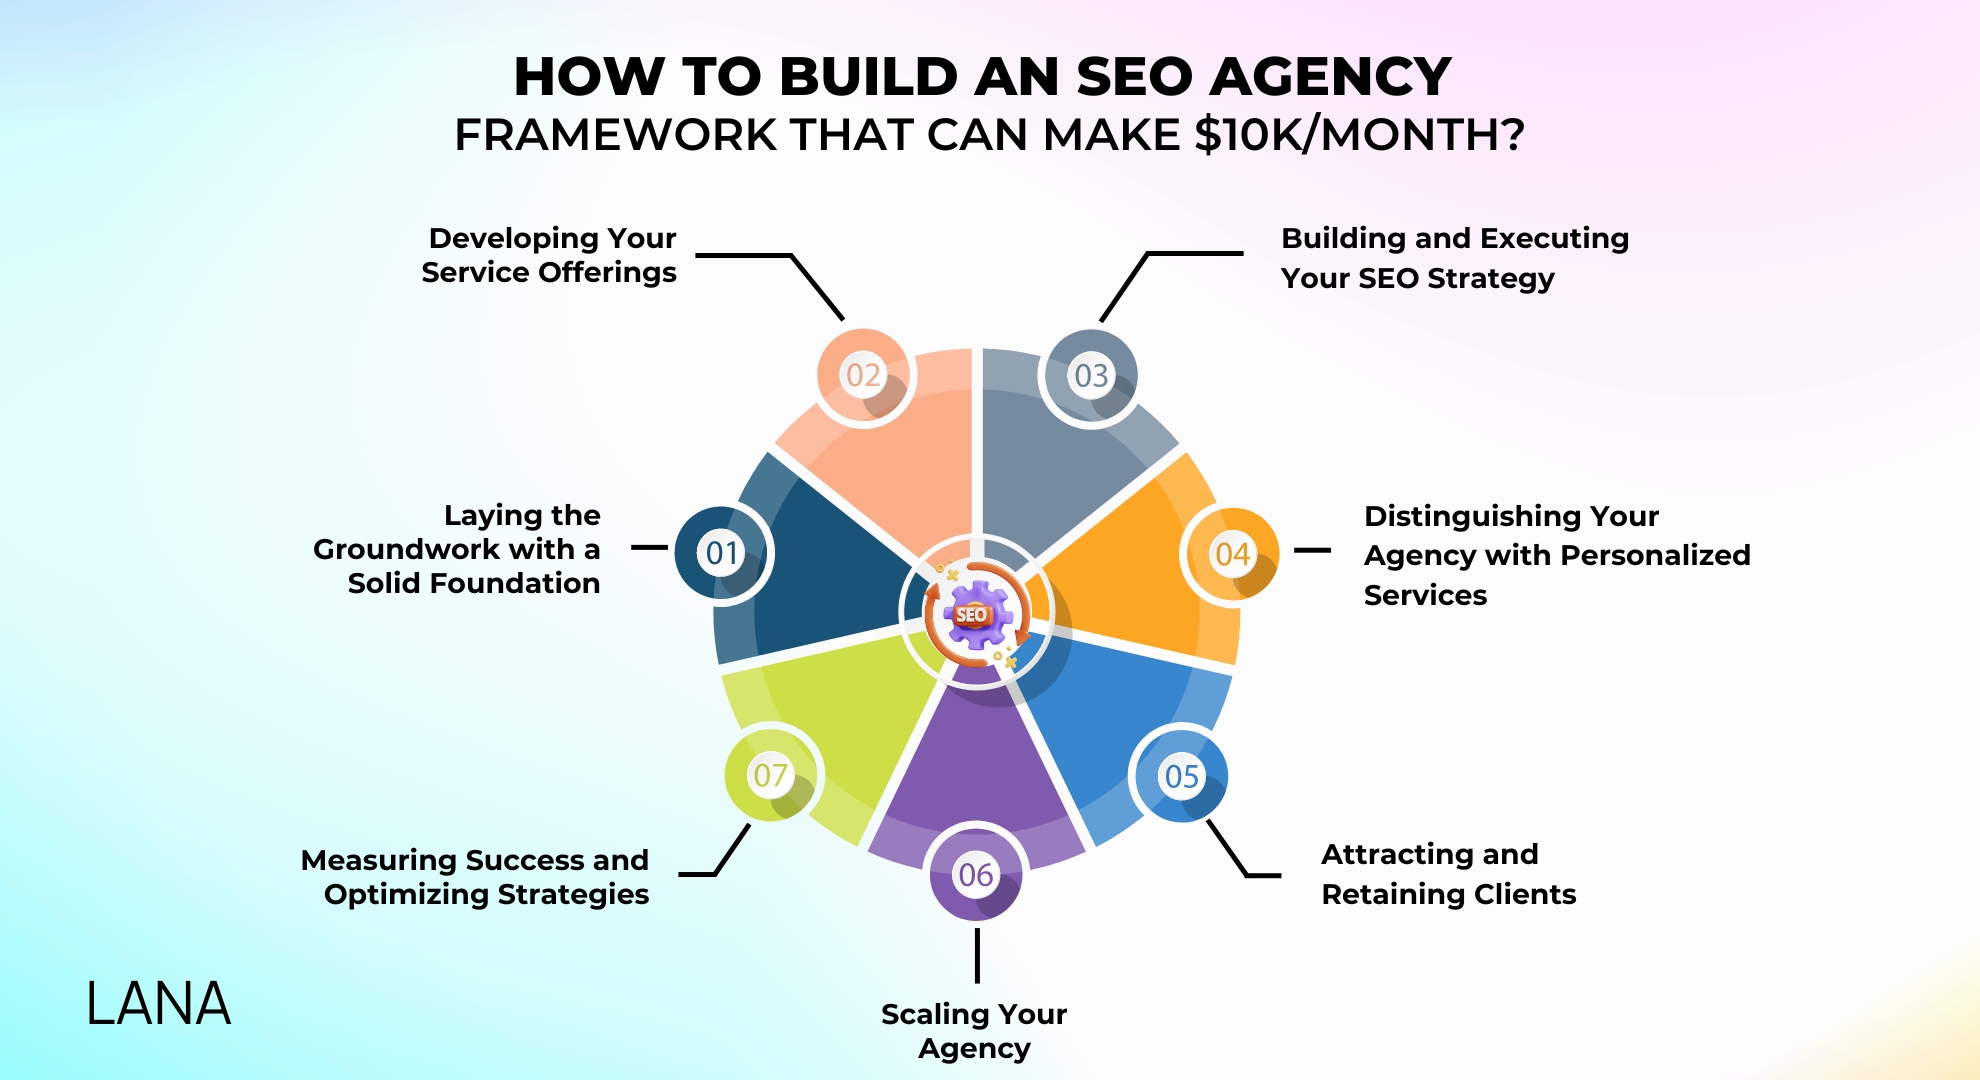 How to Build an SEO Agency Framework that can Make 10k month